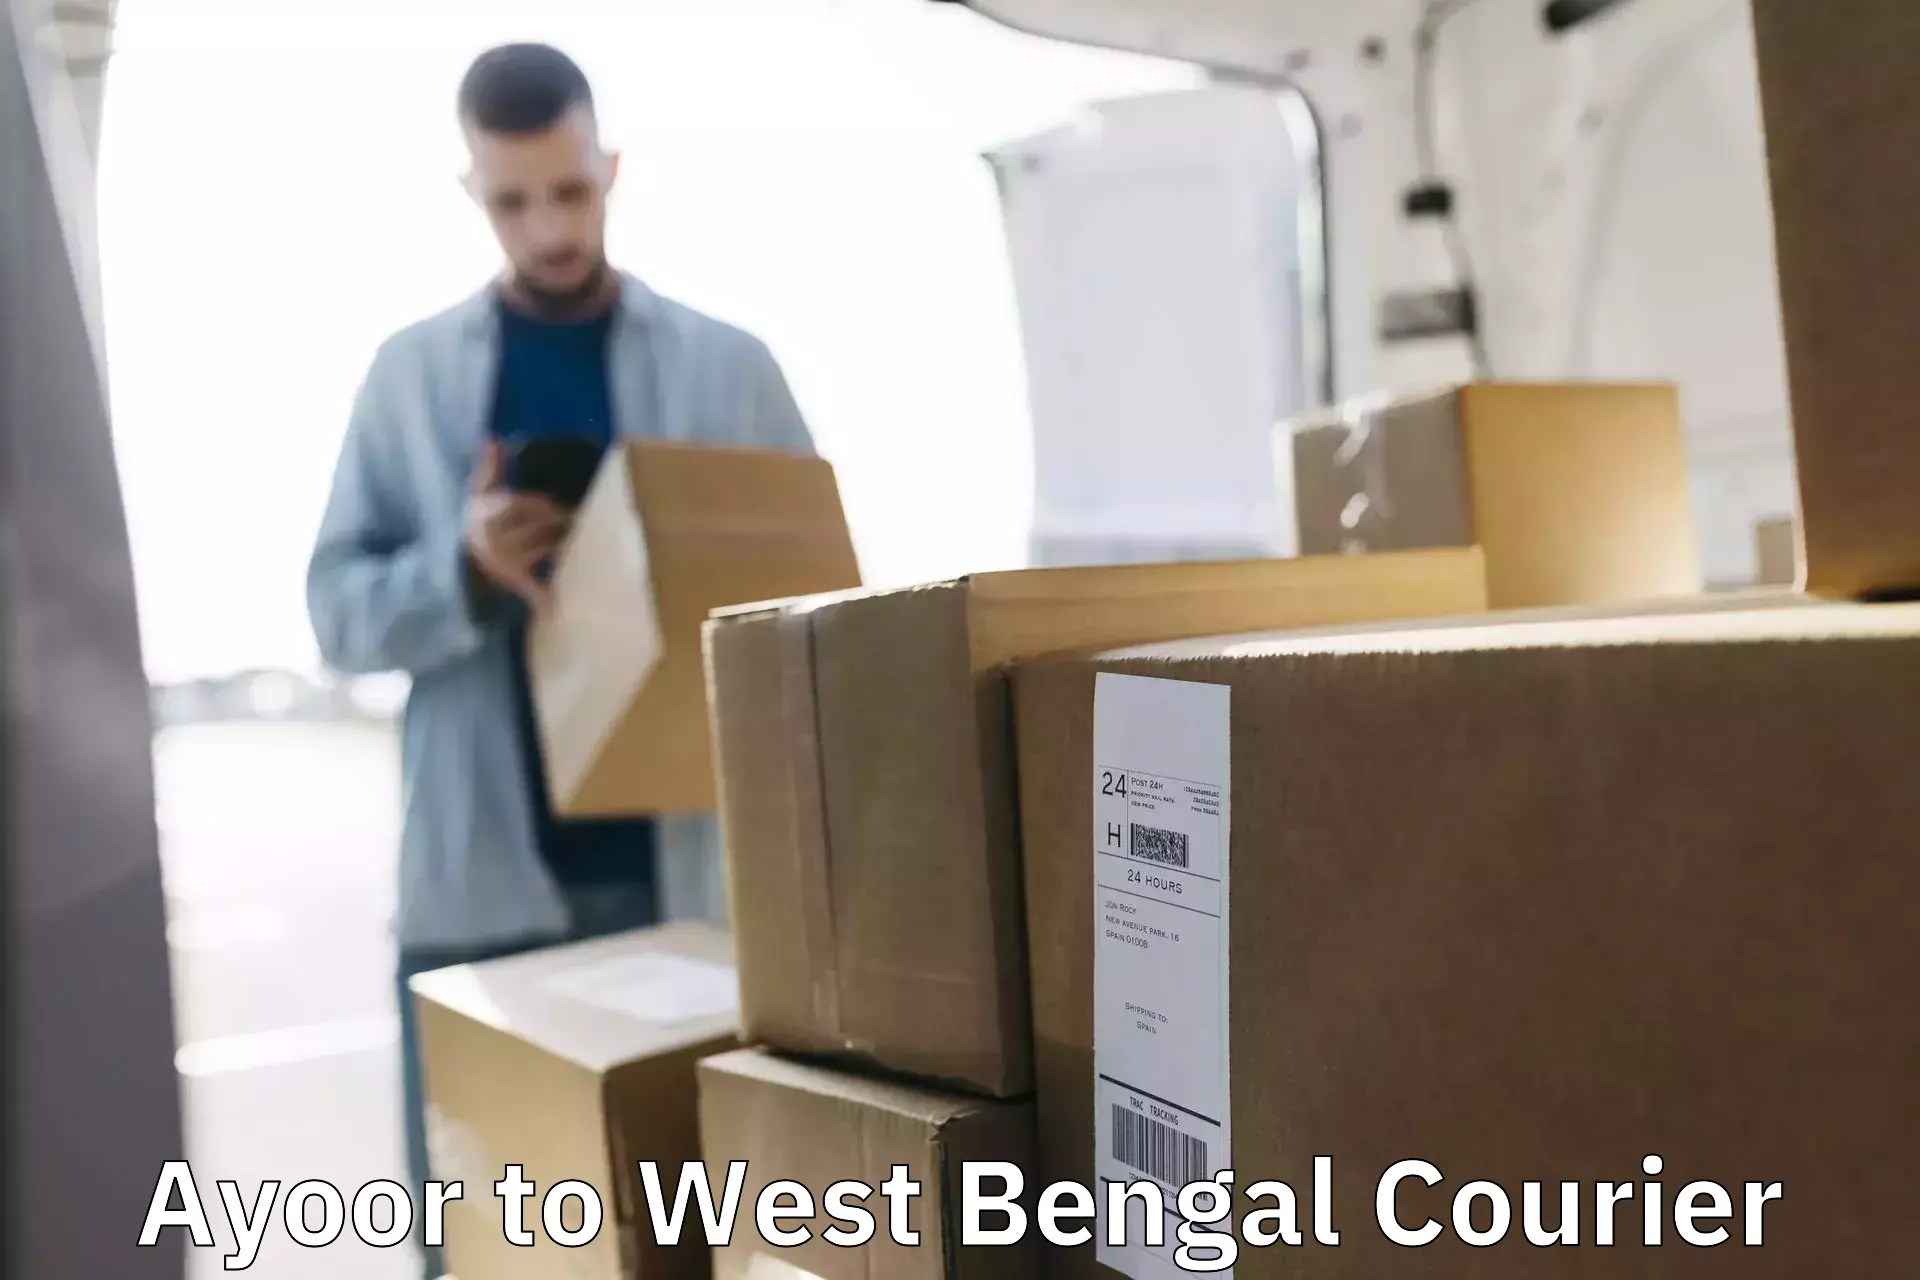 Reliable delivery network Ayoor to West Bengal